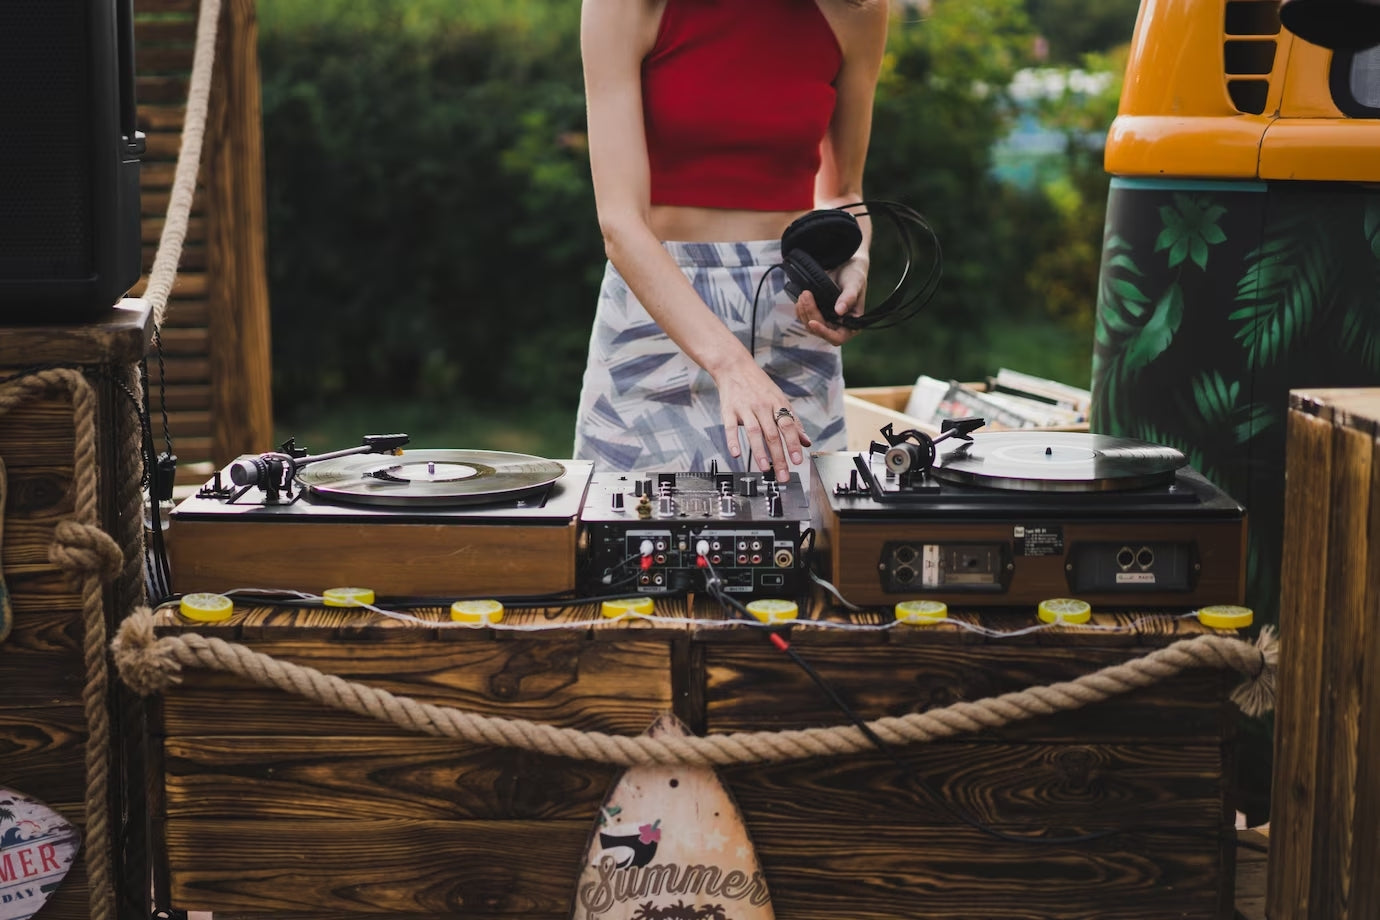 Coolest vinyl playlist for your memorial day bbq